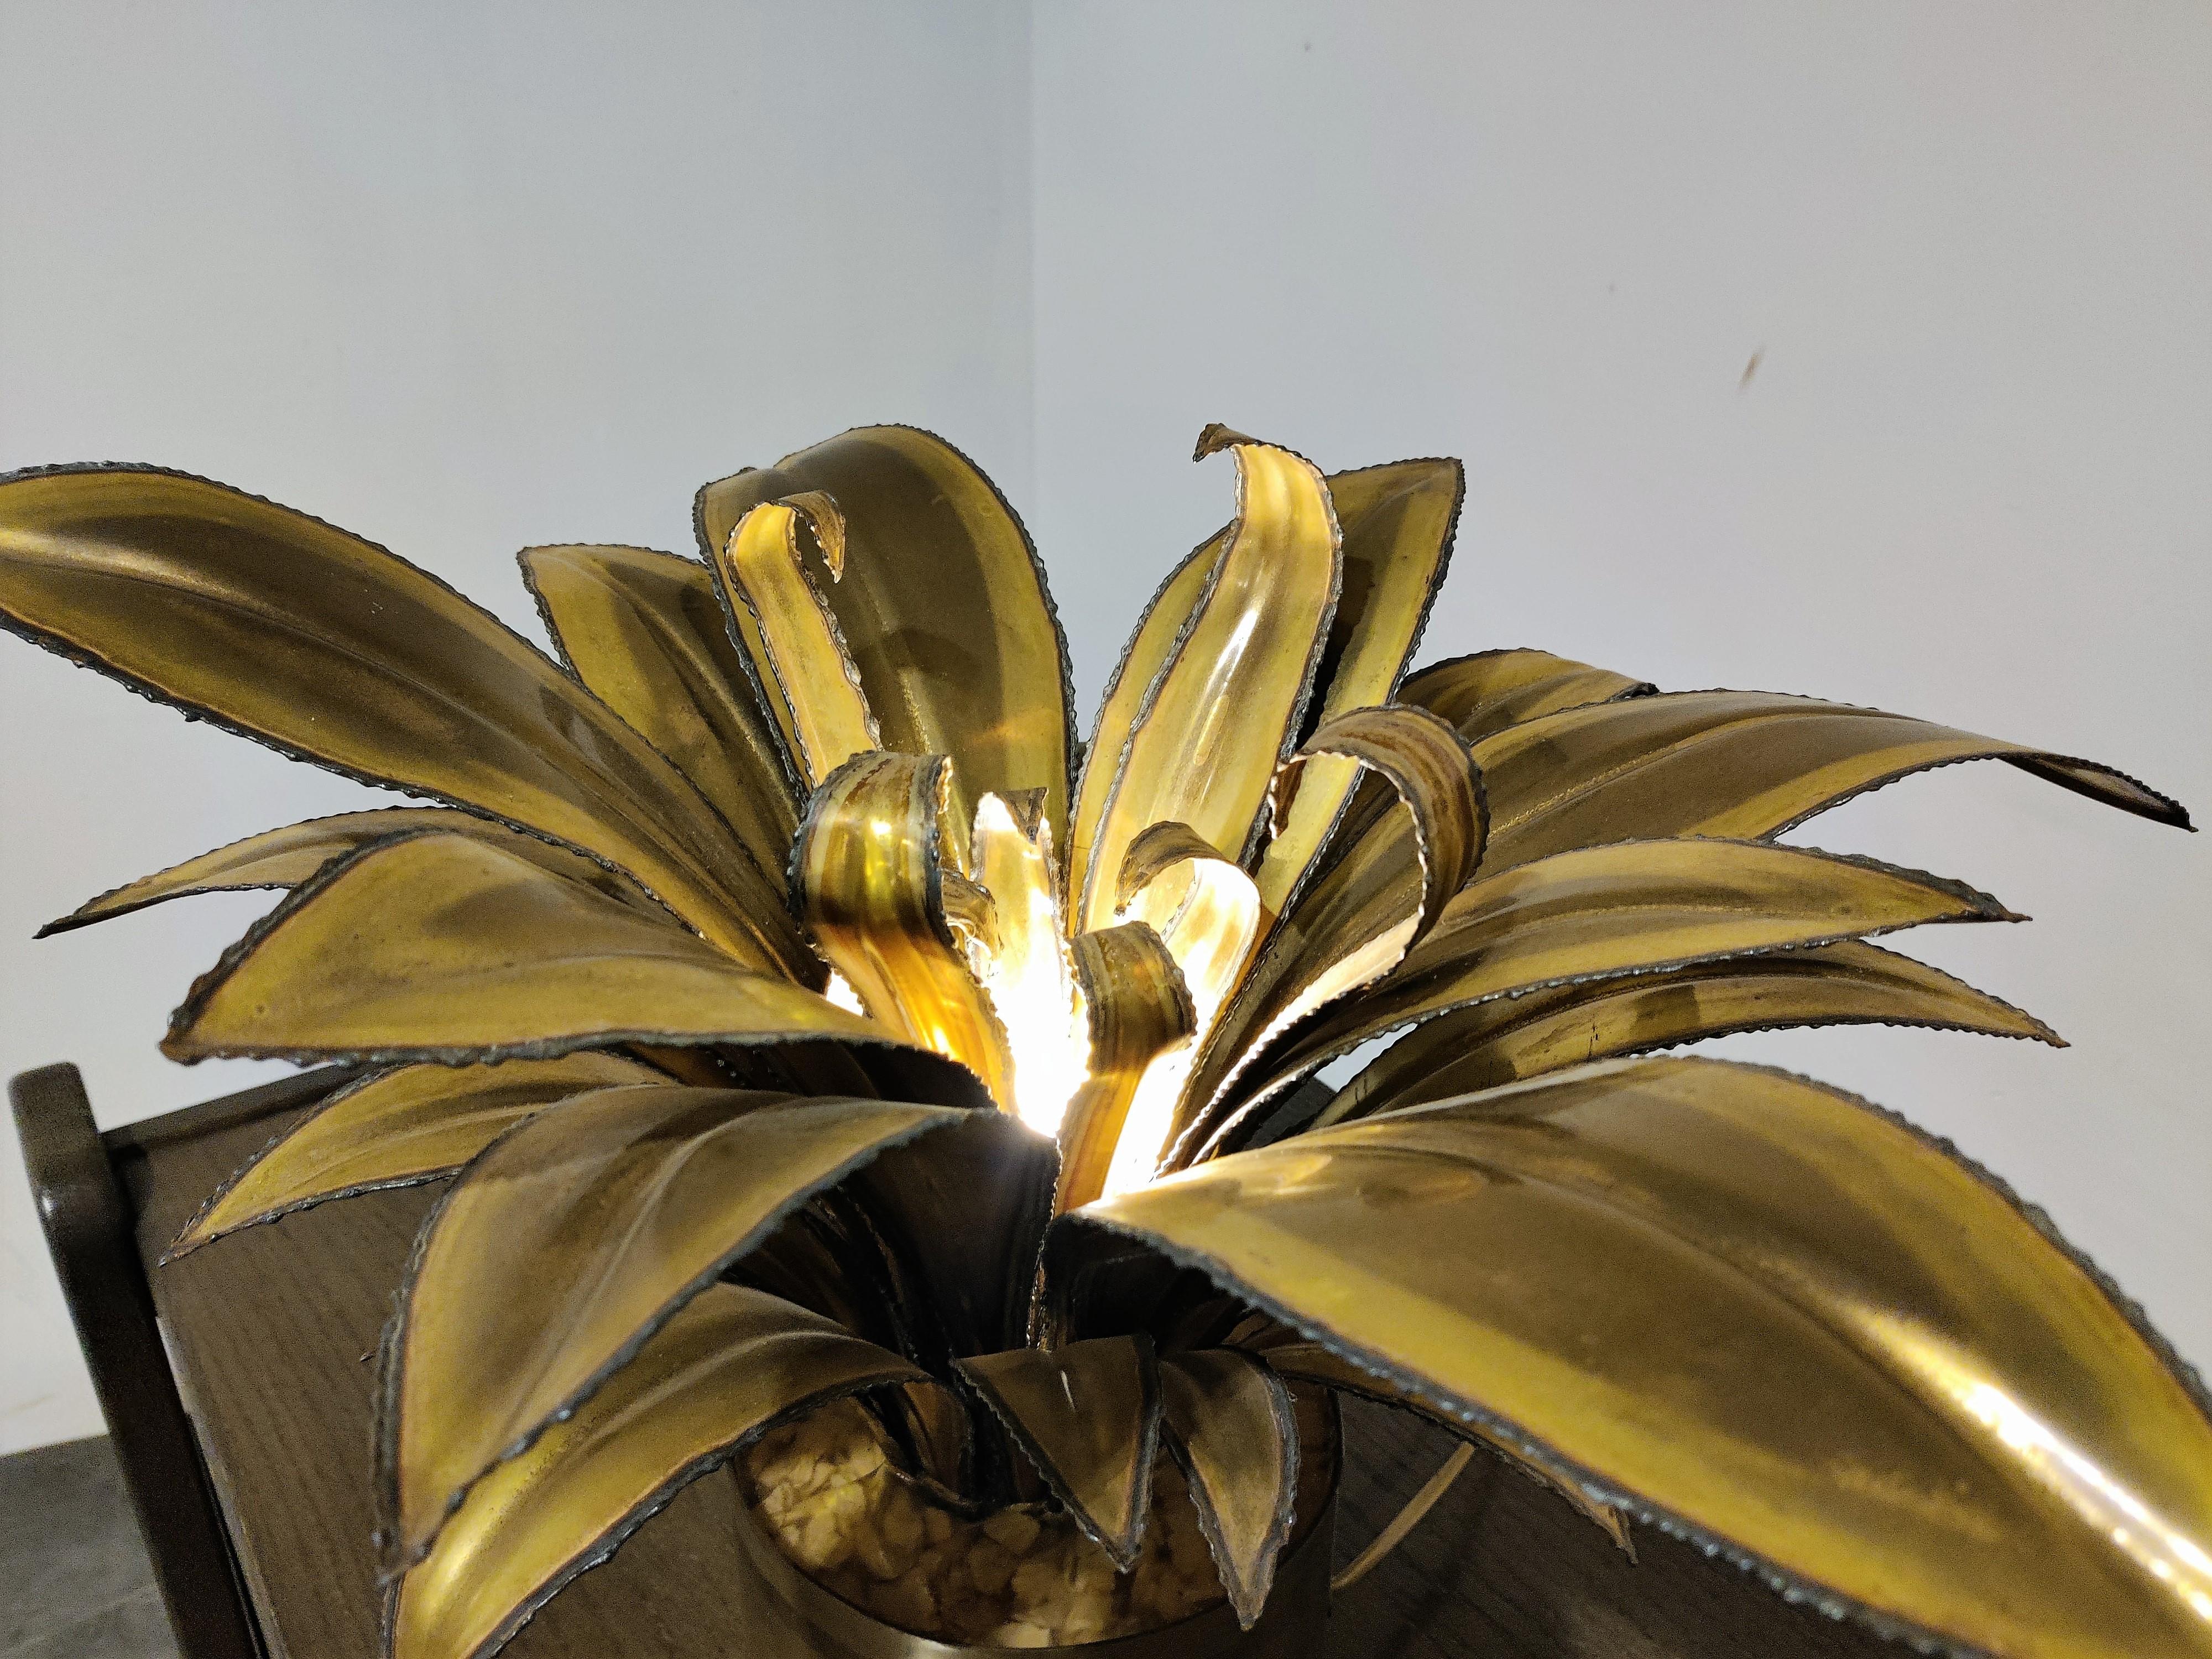 Beautiful torch cut brass flower table lamp by Maison jansen.

This flower lamp has a central lightpoint and emits a beautiful warm light.

Good original condition, tested and ready to use.

The lamp has a round brass base.

1970s -